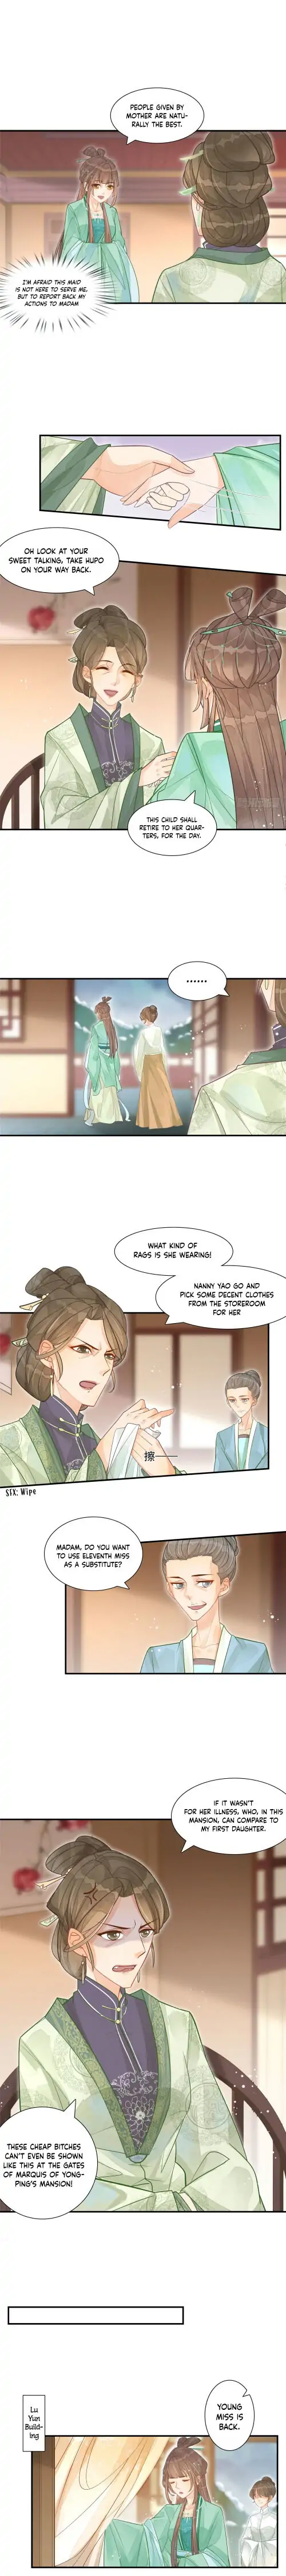 A Concubine’s Daughter and Her Tactics chapter 2